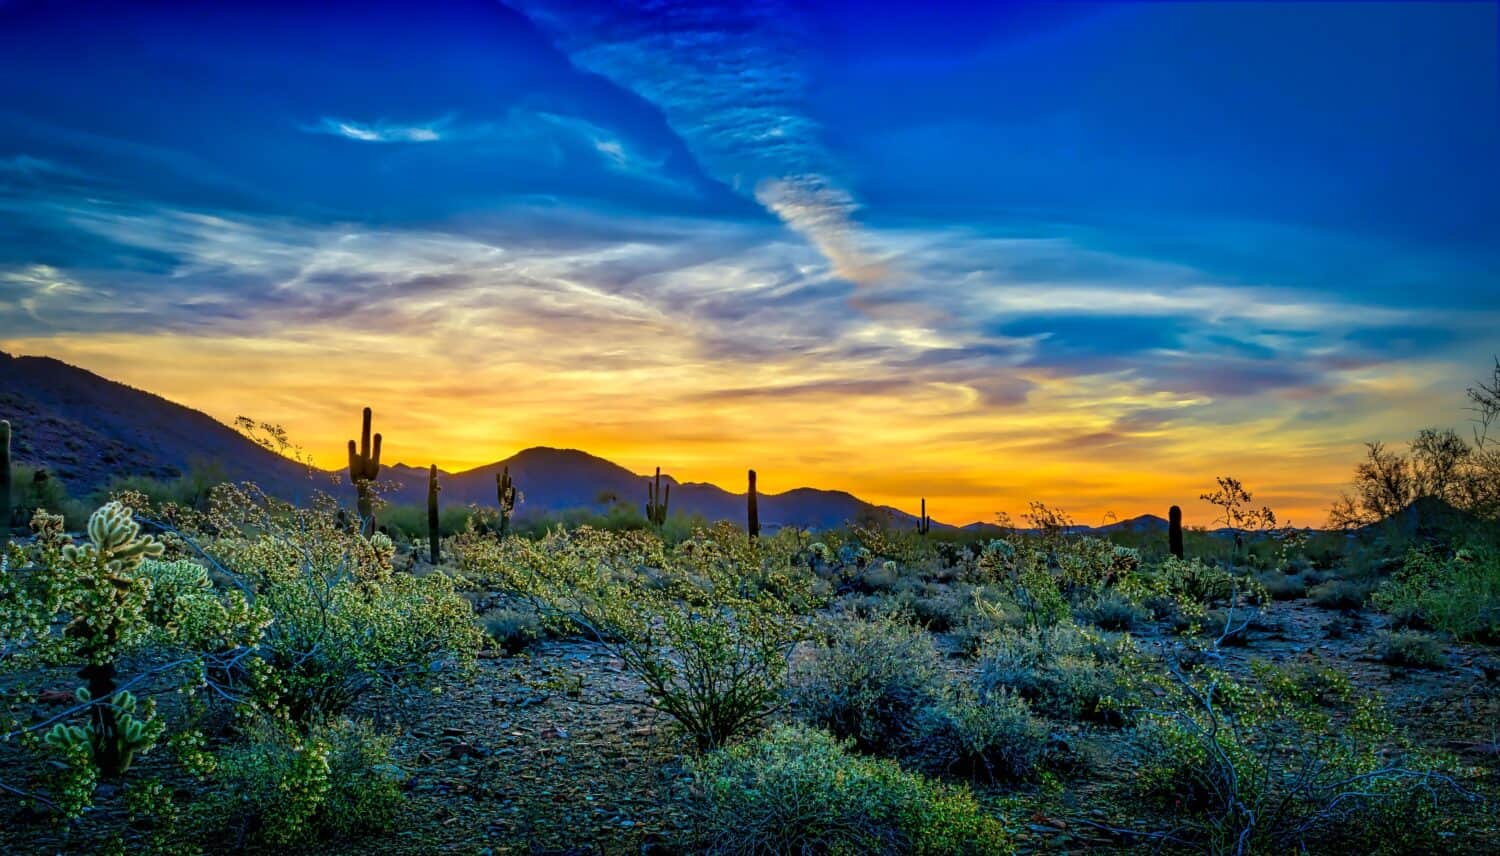 Blue and Gold Sunrise - Desert flora in full bloom provide a frame for a colorful Scottsdale, Arizona sunrise, rich with golds and blues.  